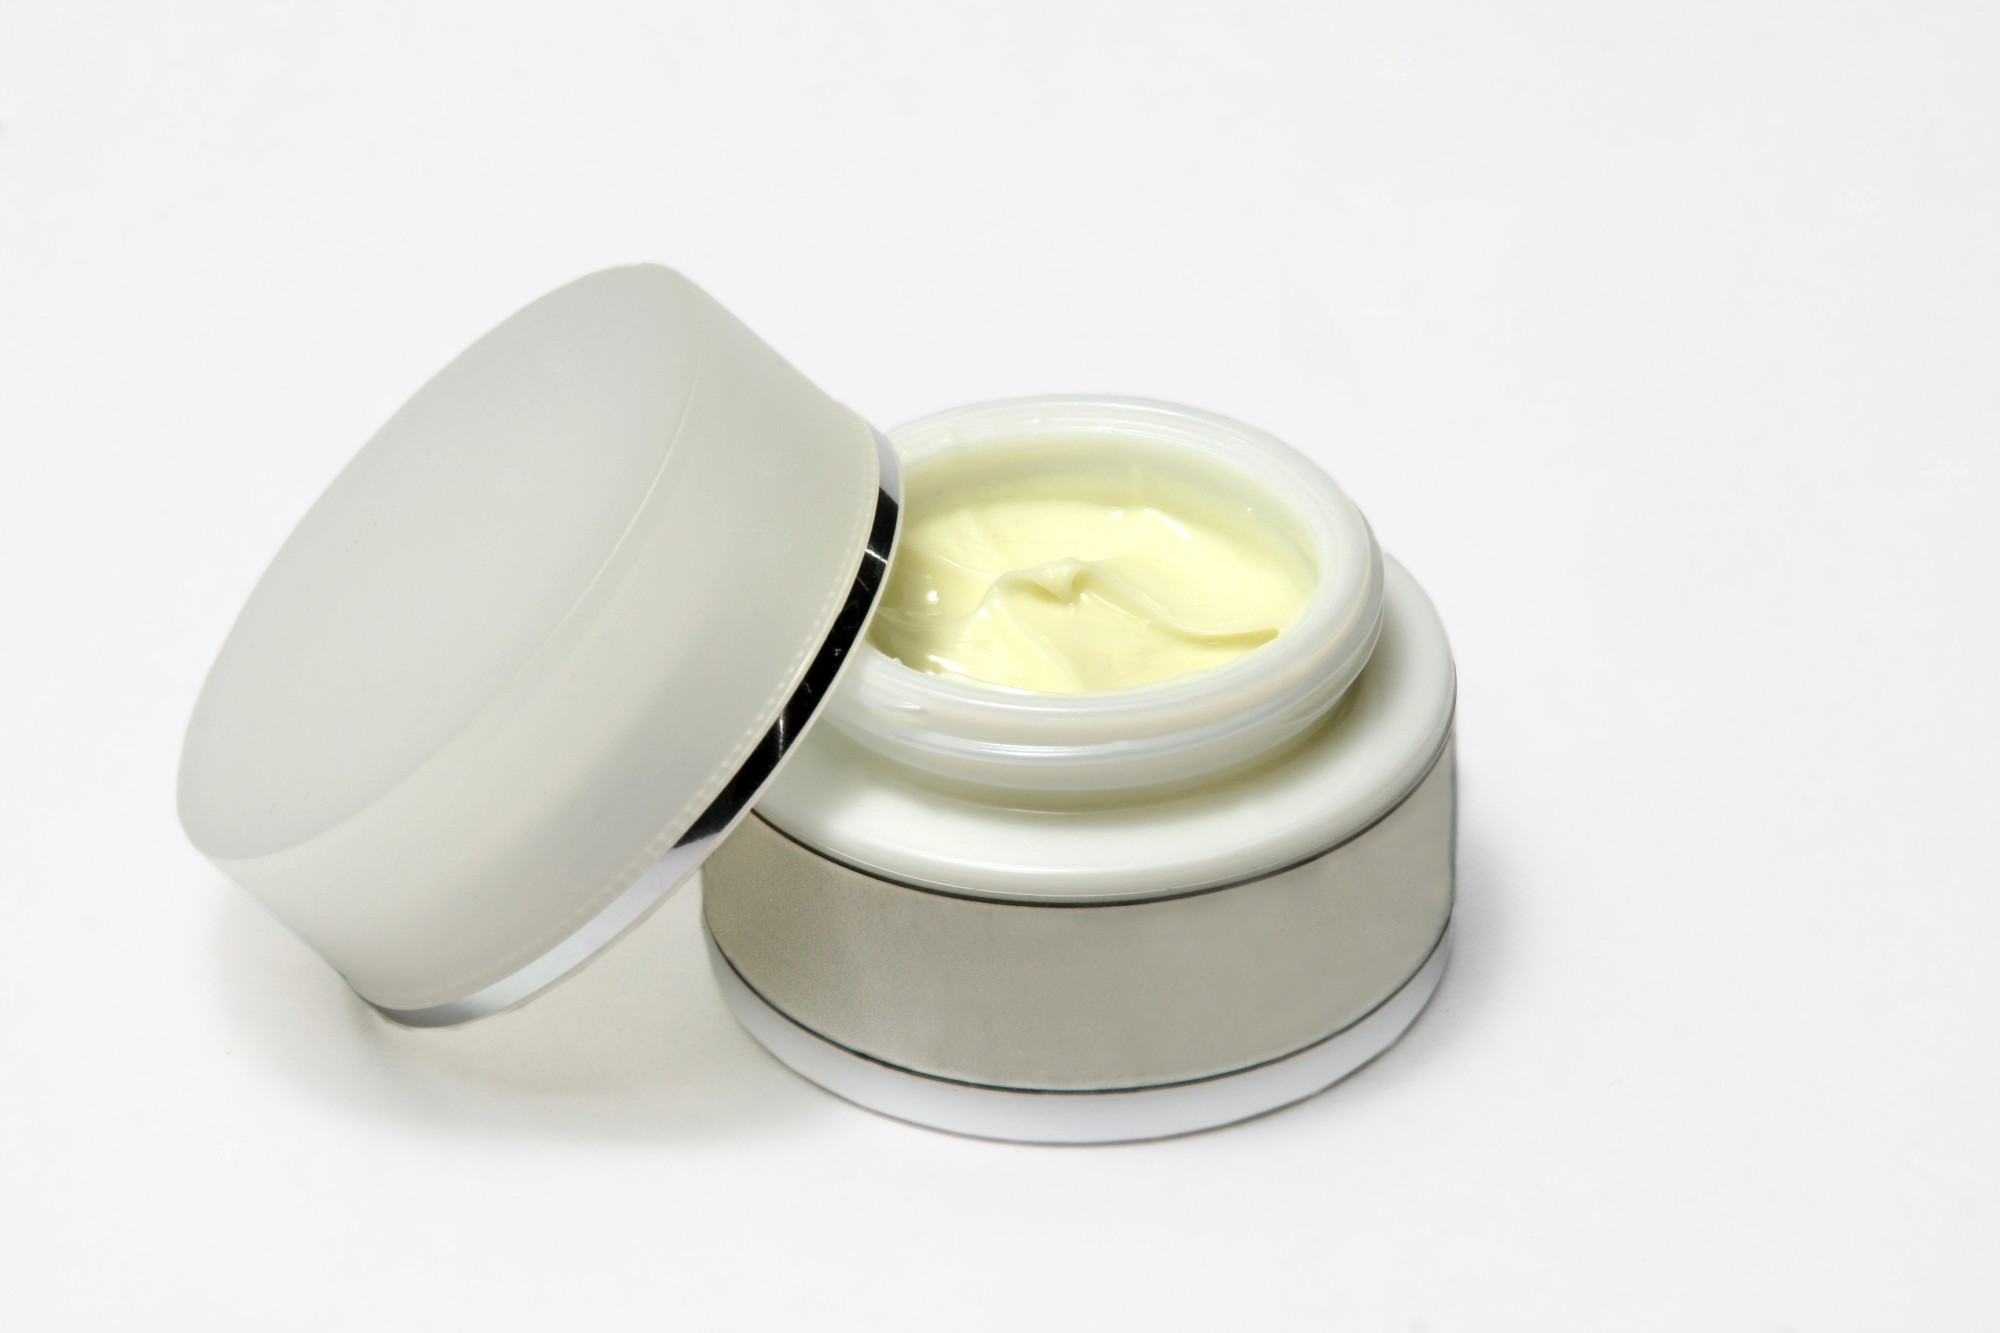 Are you looking for the right cream for your skin type? Read here for a guide to the different types of cream to find the right kind for your skin.